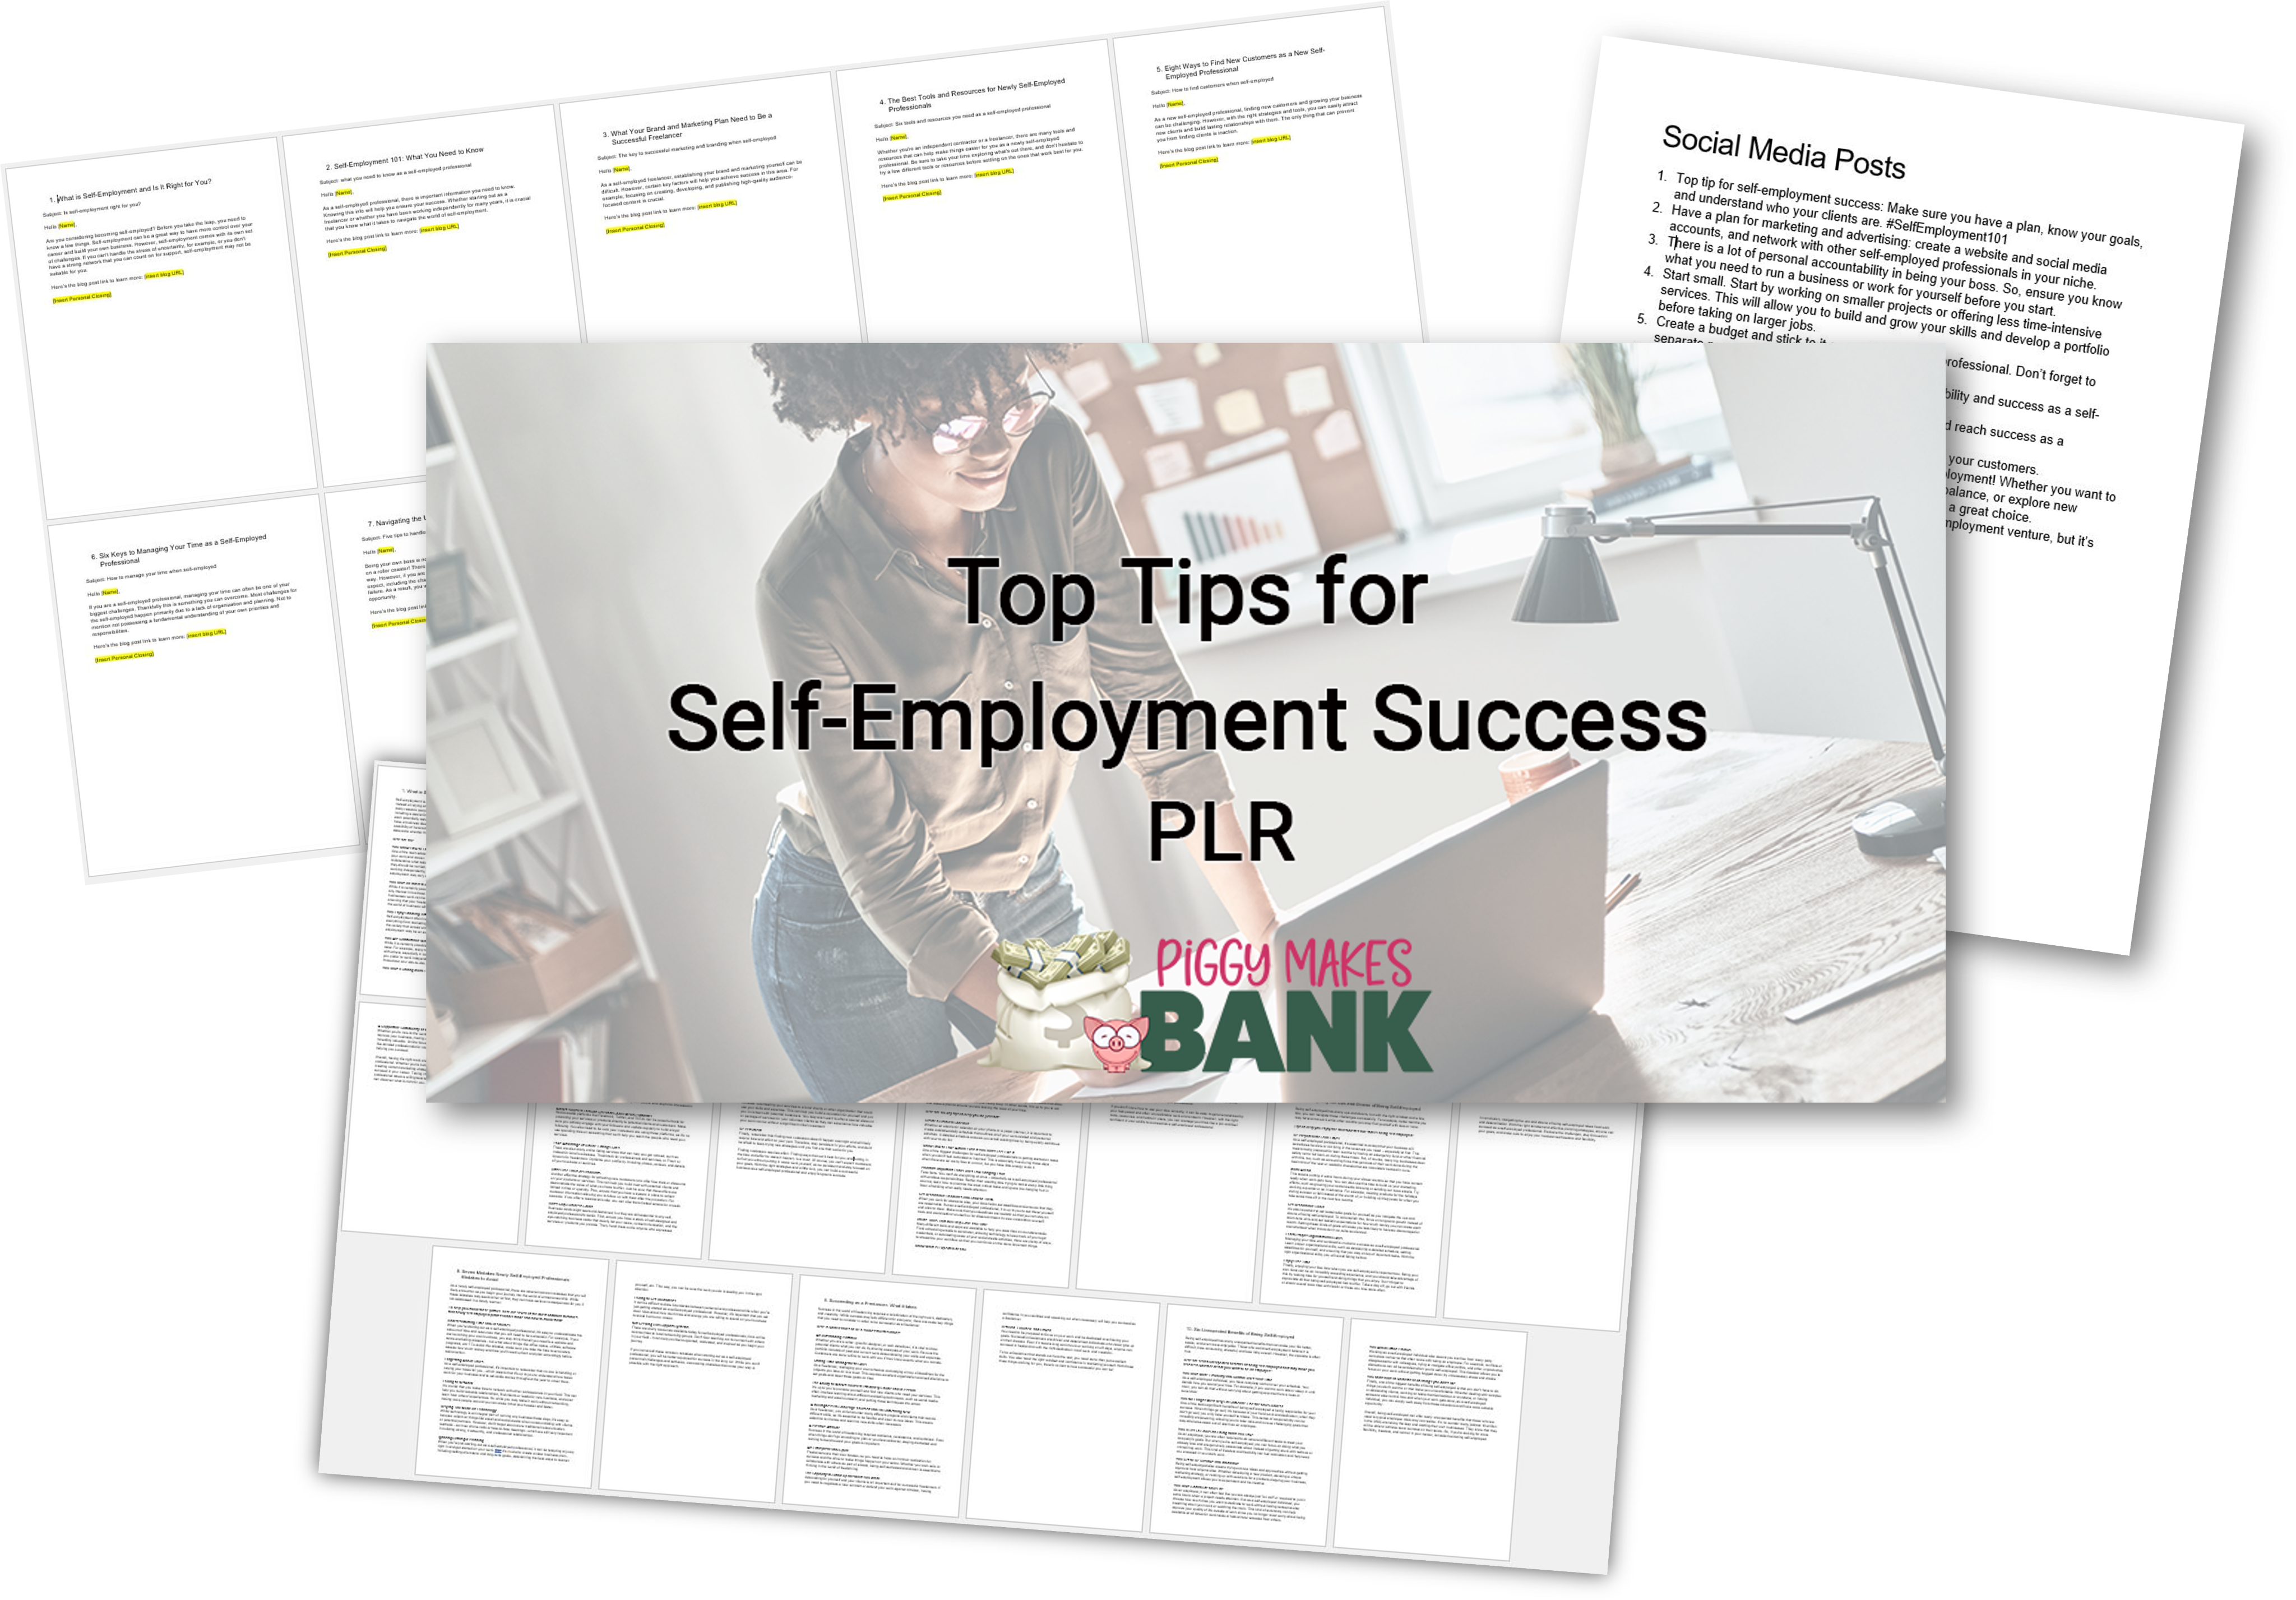 Top Tips for Self-Employment Success PLR